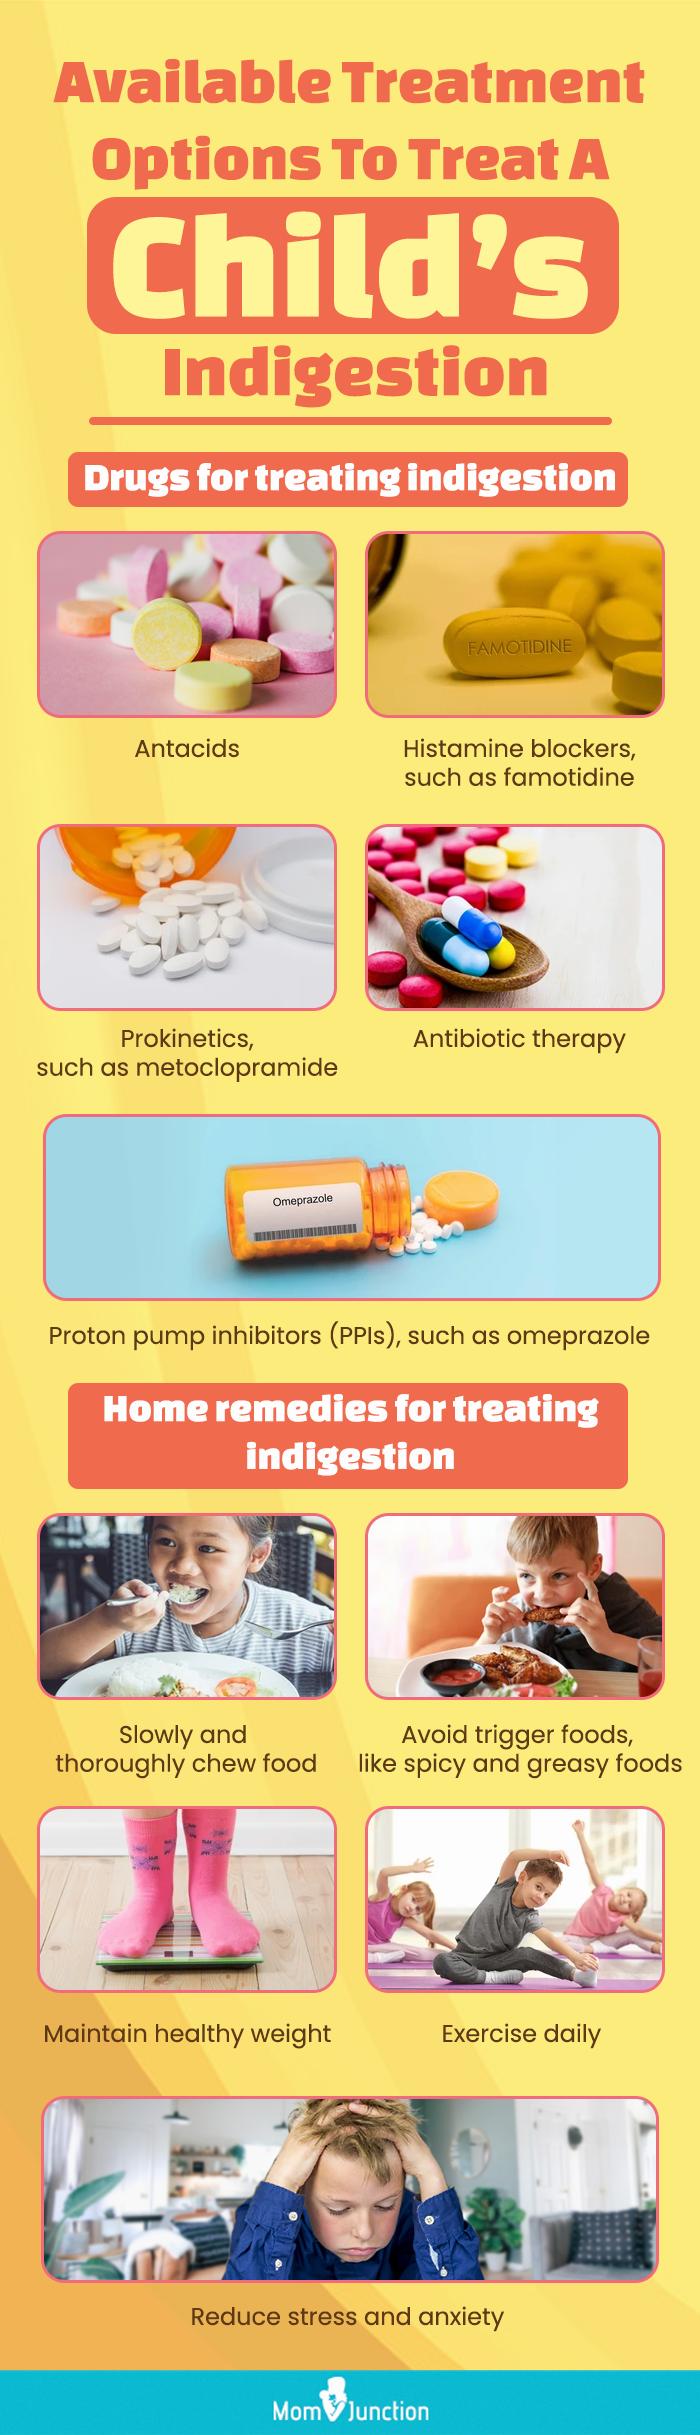 A table of treatment options for indigestion in children, including drugs such as antacids, histamine blockers, prokinetics, antibiotics, and proton pump inhibitors, as well as home remedies like eating slowly, avoiding trigger foods, maintaining a healthy weight, exercising, and reducing stress.